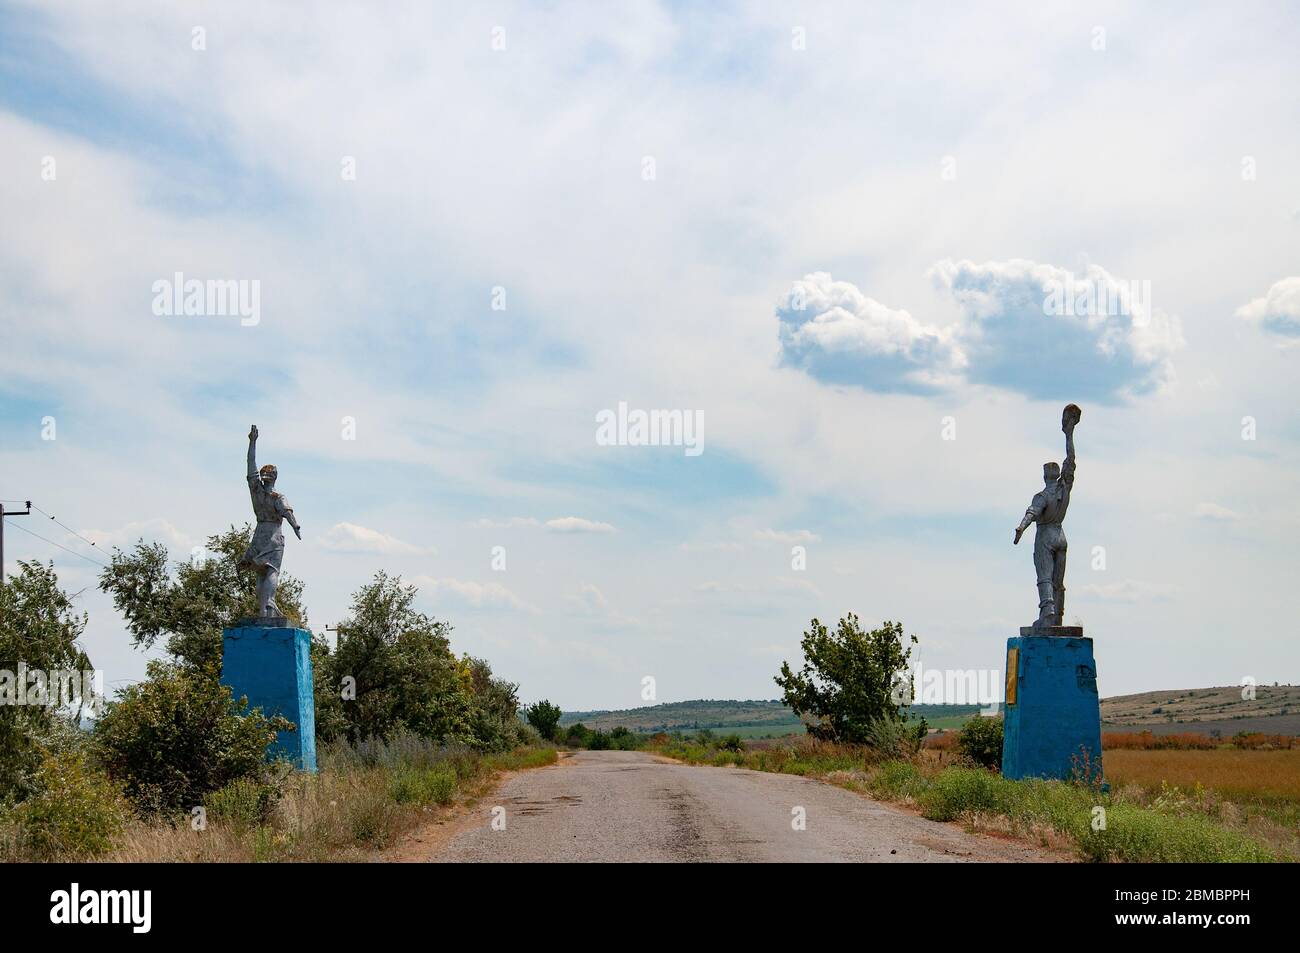 Silhouettes of Worker and Kolkhoz Woman style statues by roadsides. Social realism monuments in countryside of Ukraine. Stock Photo